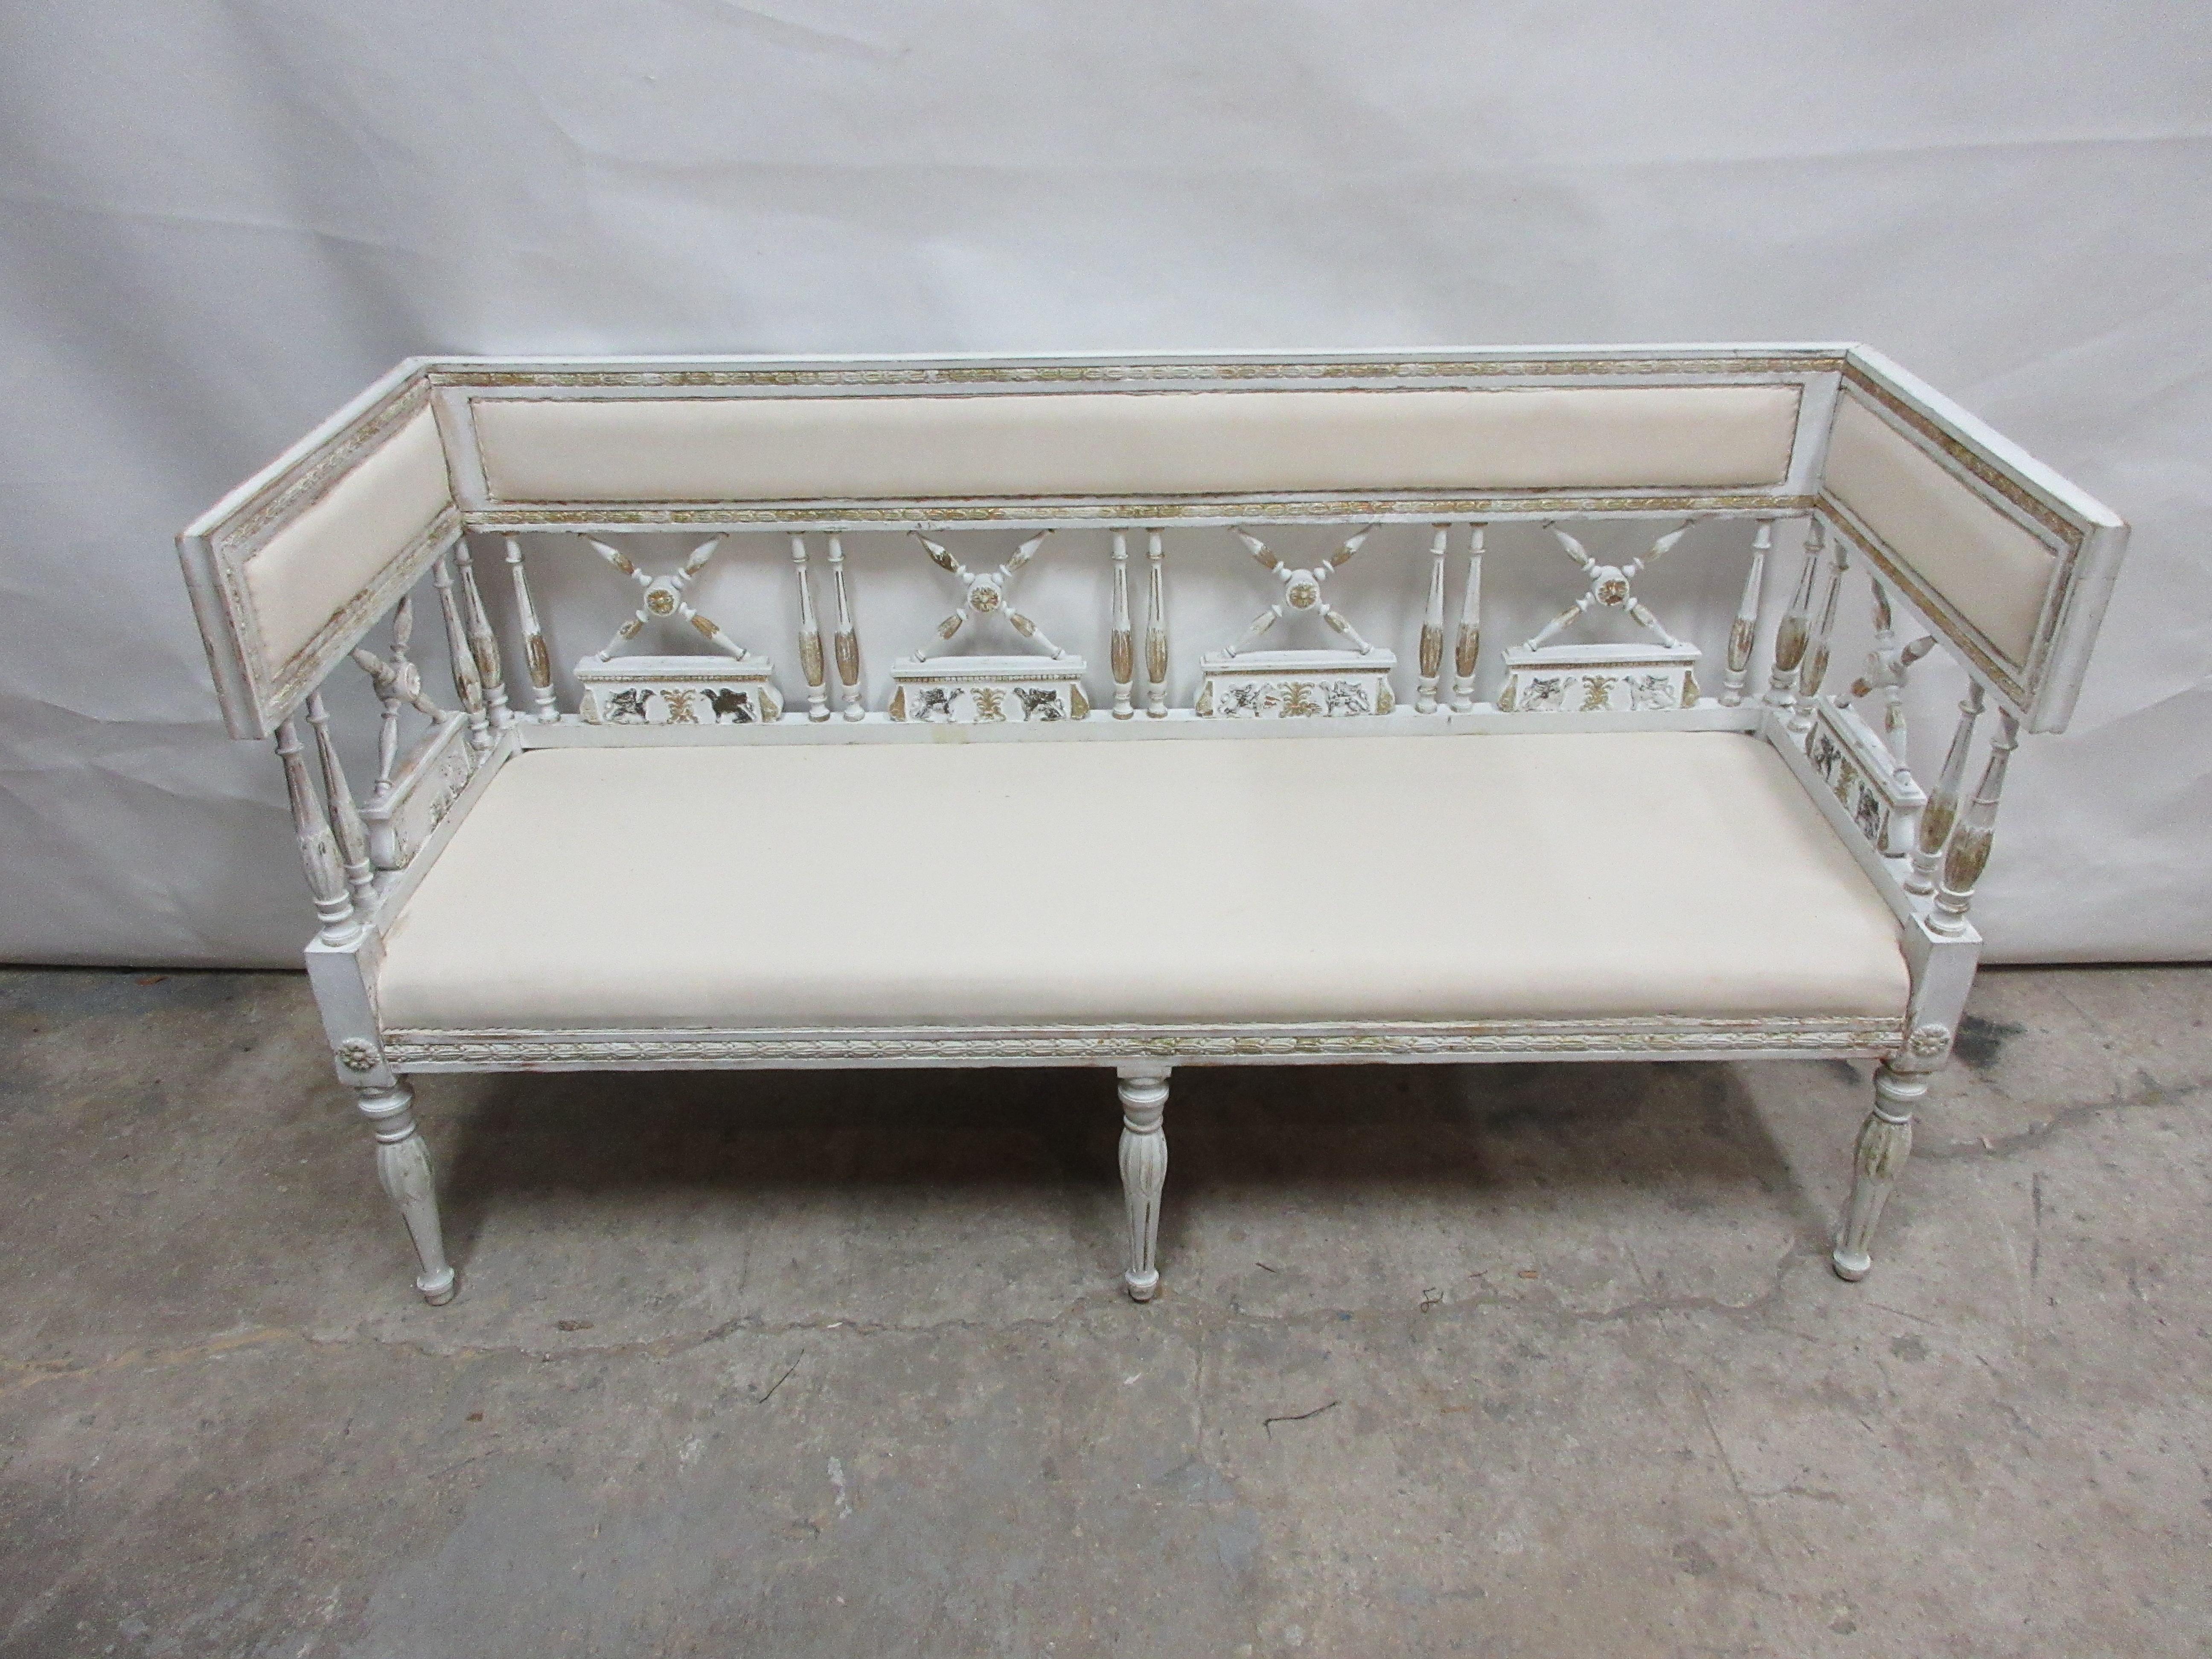 This is a 100% original painted Swedish Gustavian sofa. It has new cushion seating covered in Muslin. This sofa was found at an Auction in Stockholm, Sweden.